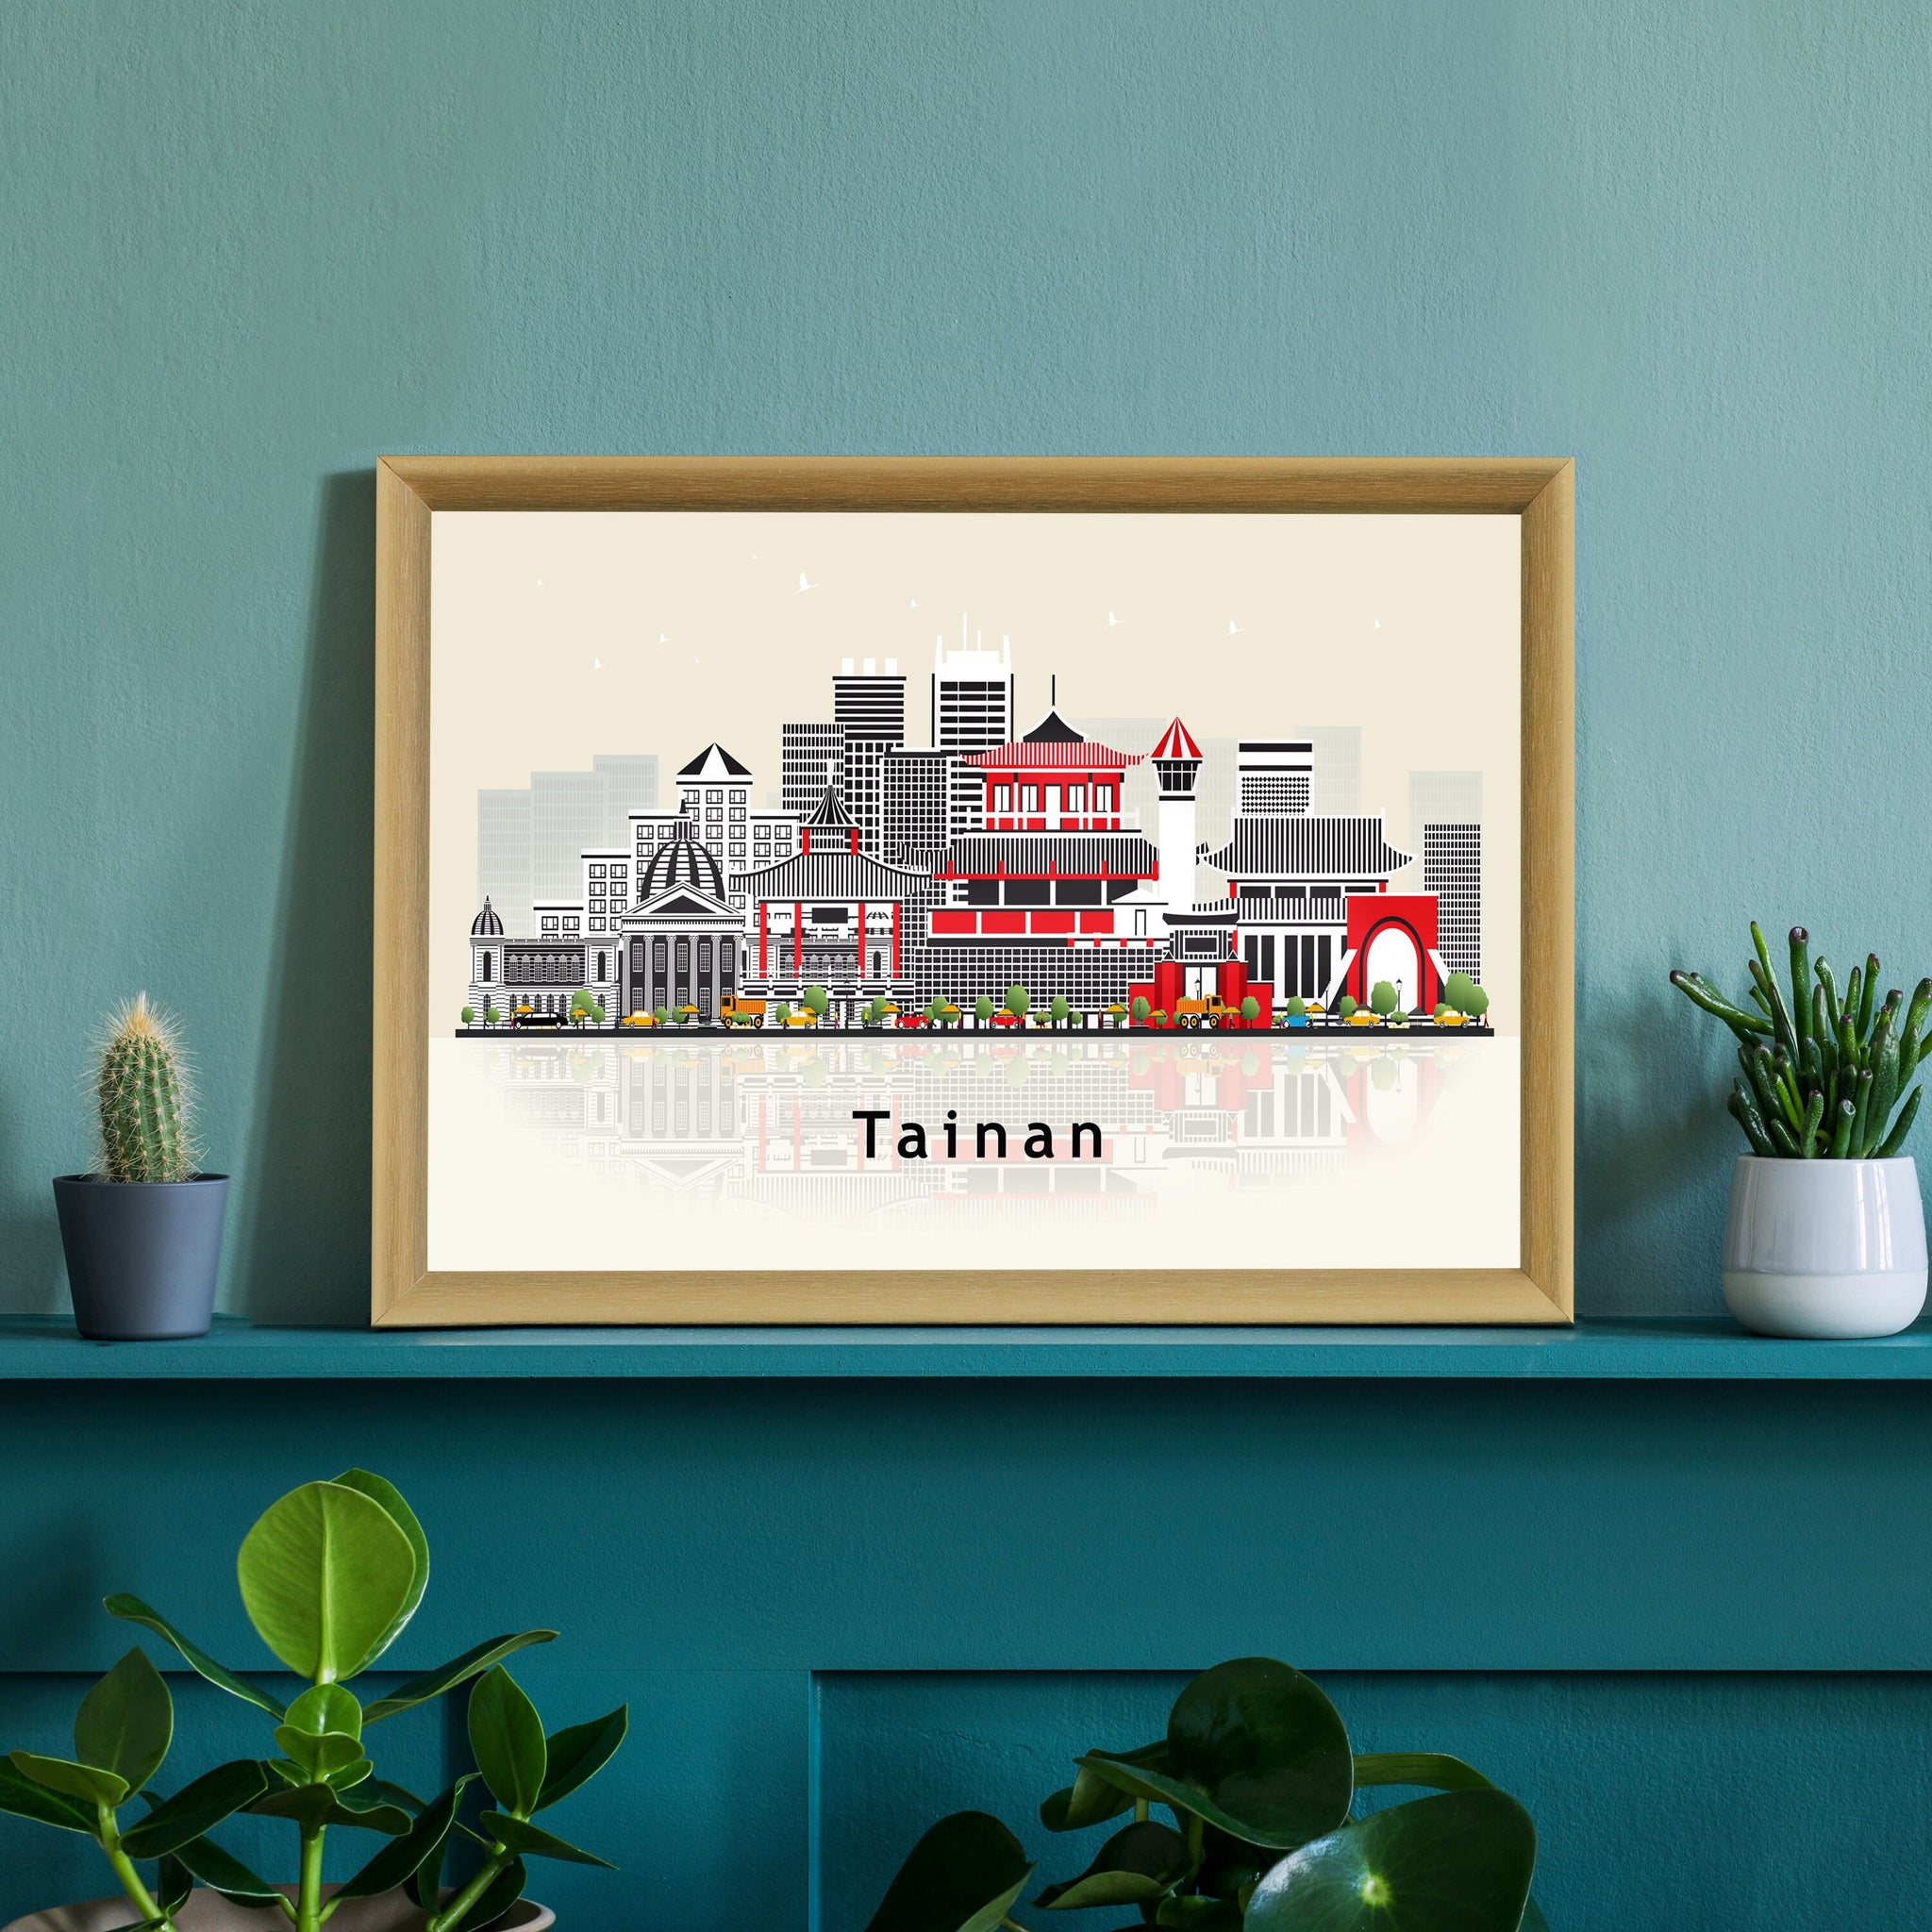 TAINAN TAIWAN Illustration skyline poster, Modern skyline cityscape poster, Tainan city skyline landmark map poster, Home wall decorations